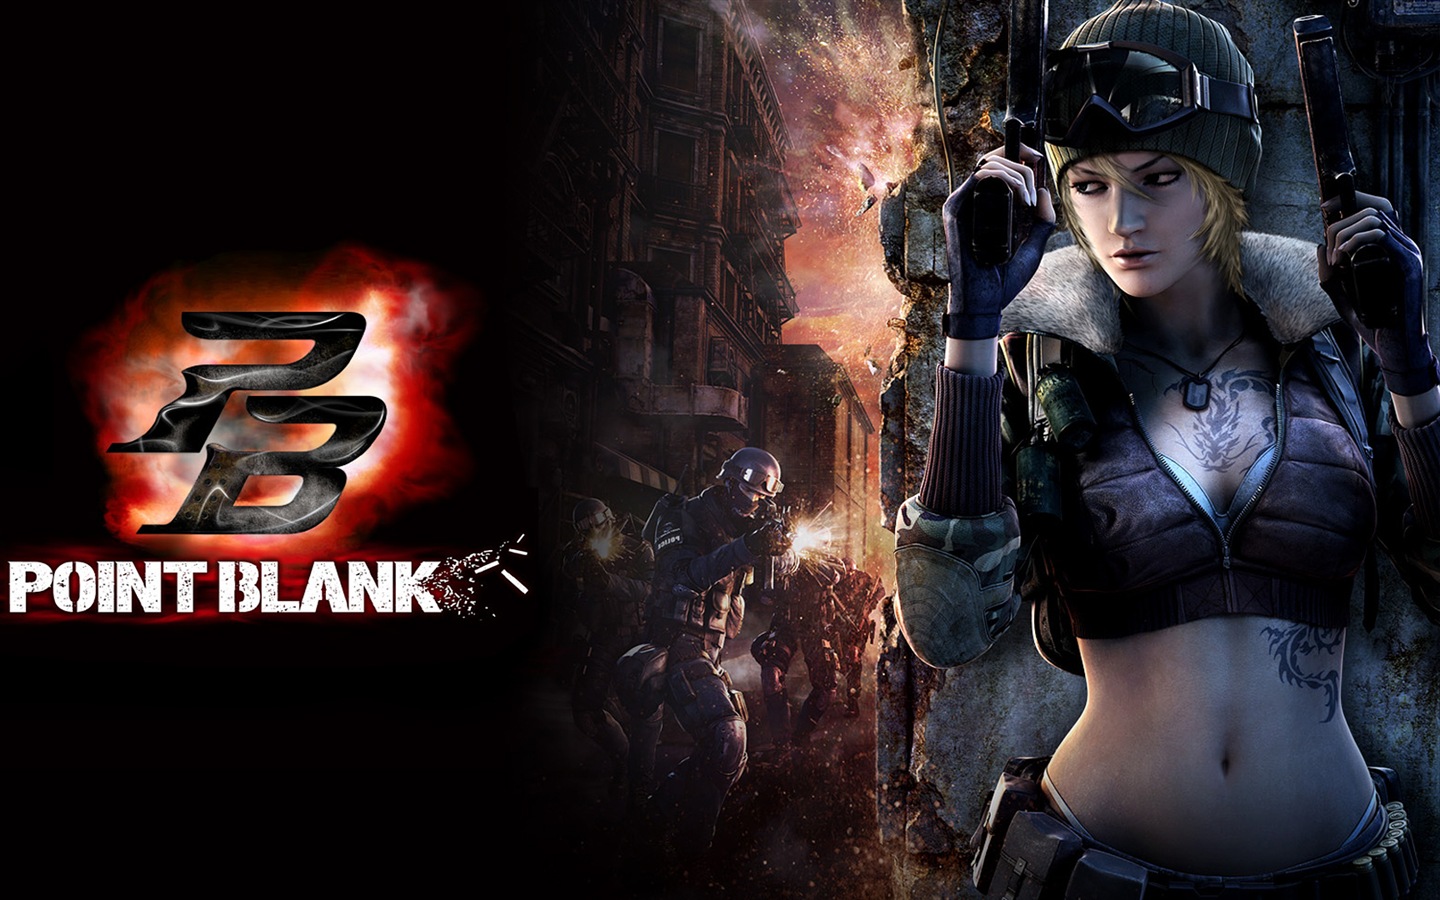 Point Blank HD game wallpapers #2 - 1440x900